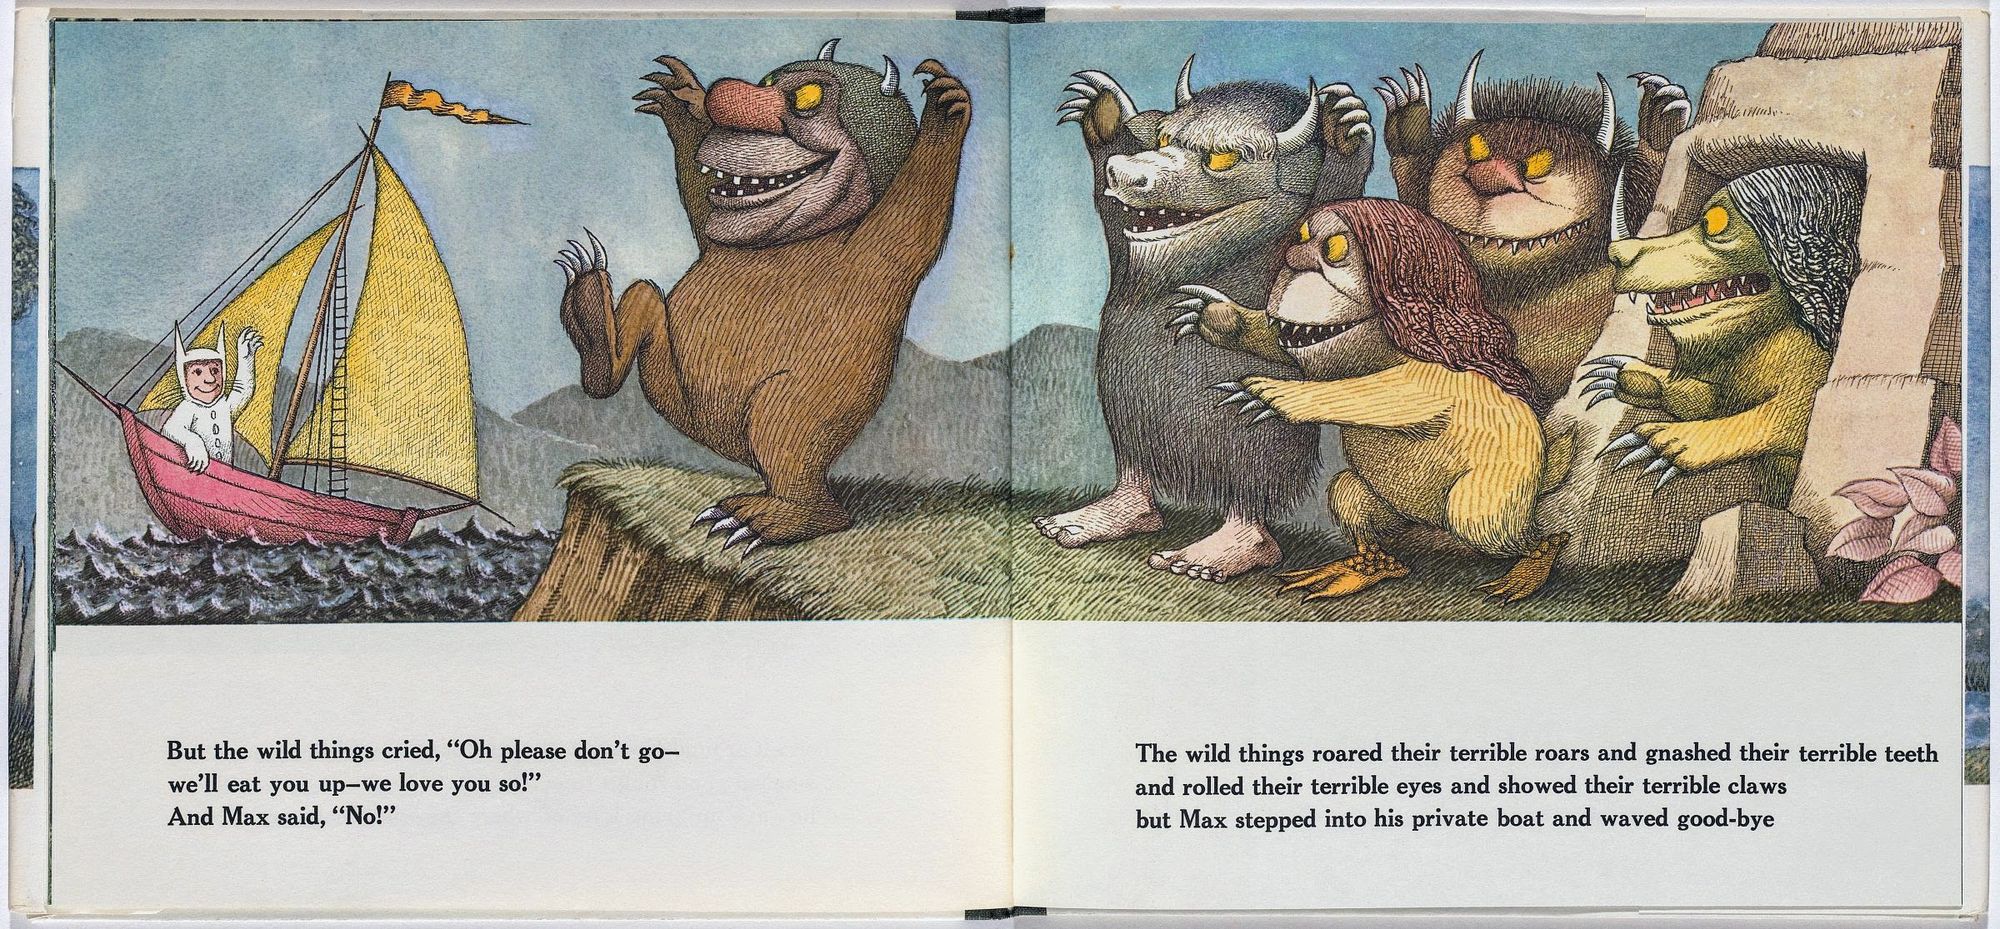 Wild Rumpus Books - All You Need to Know BEFORE You Go (with Photos)